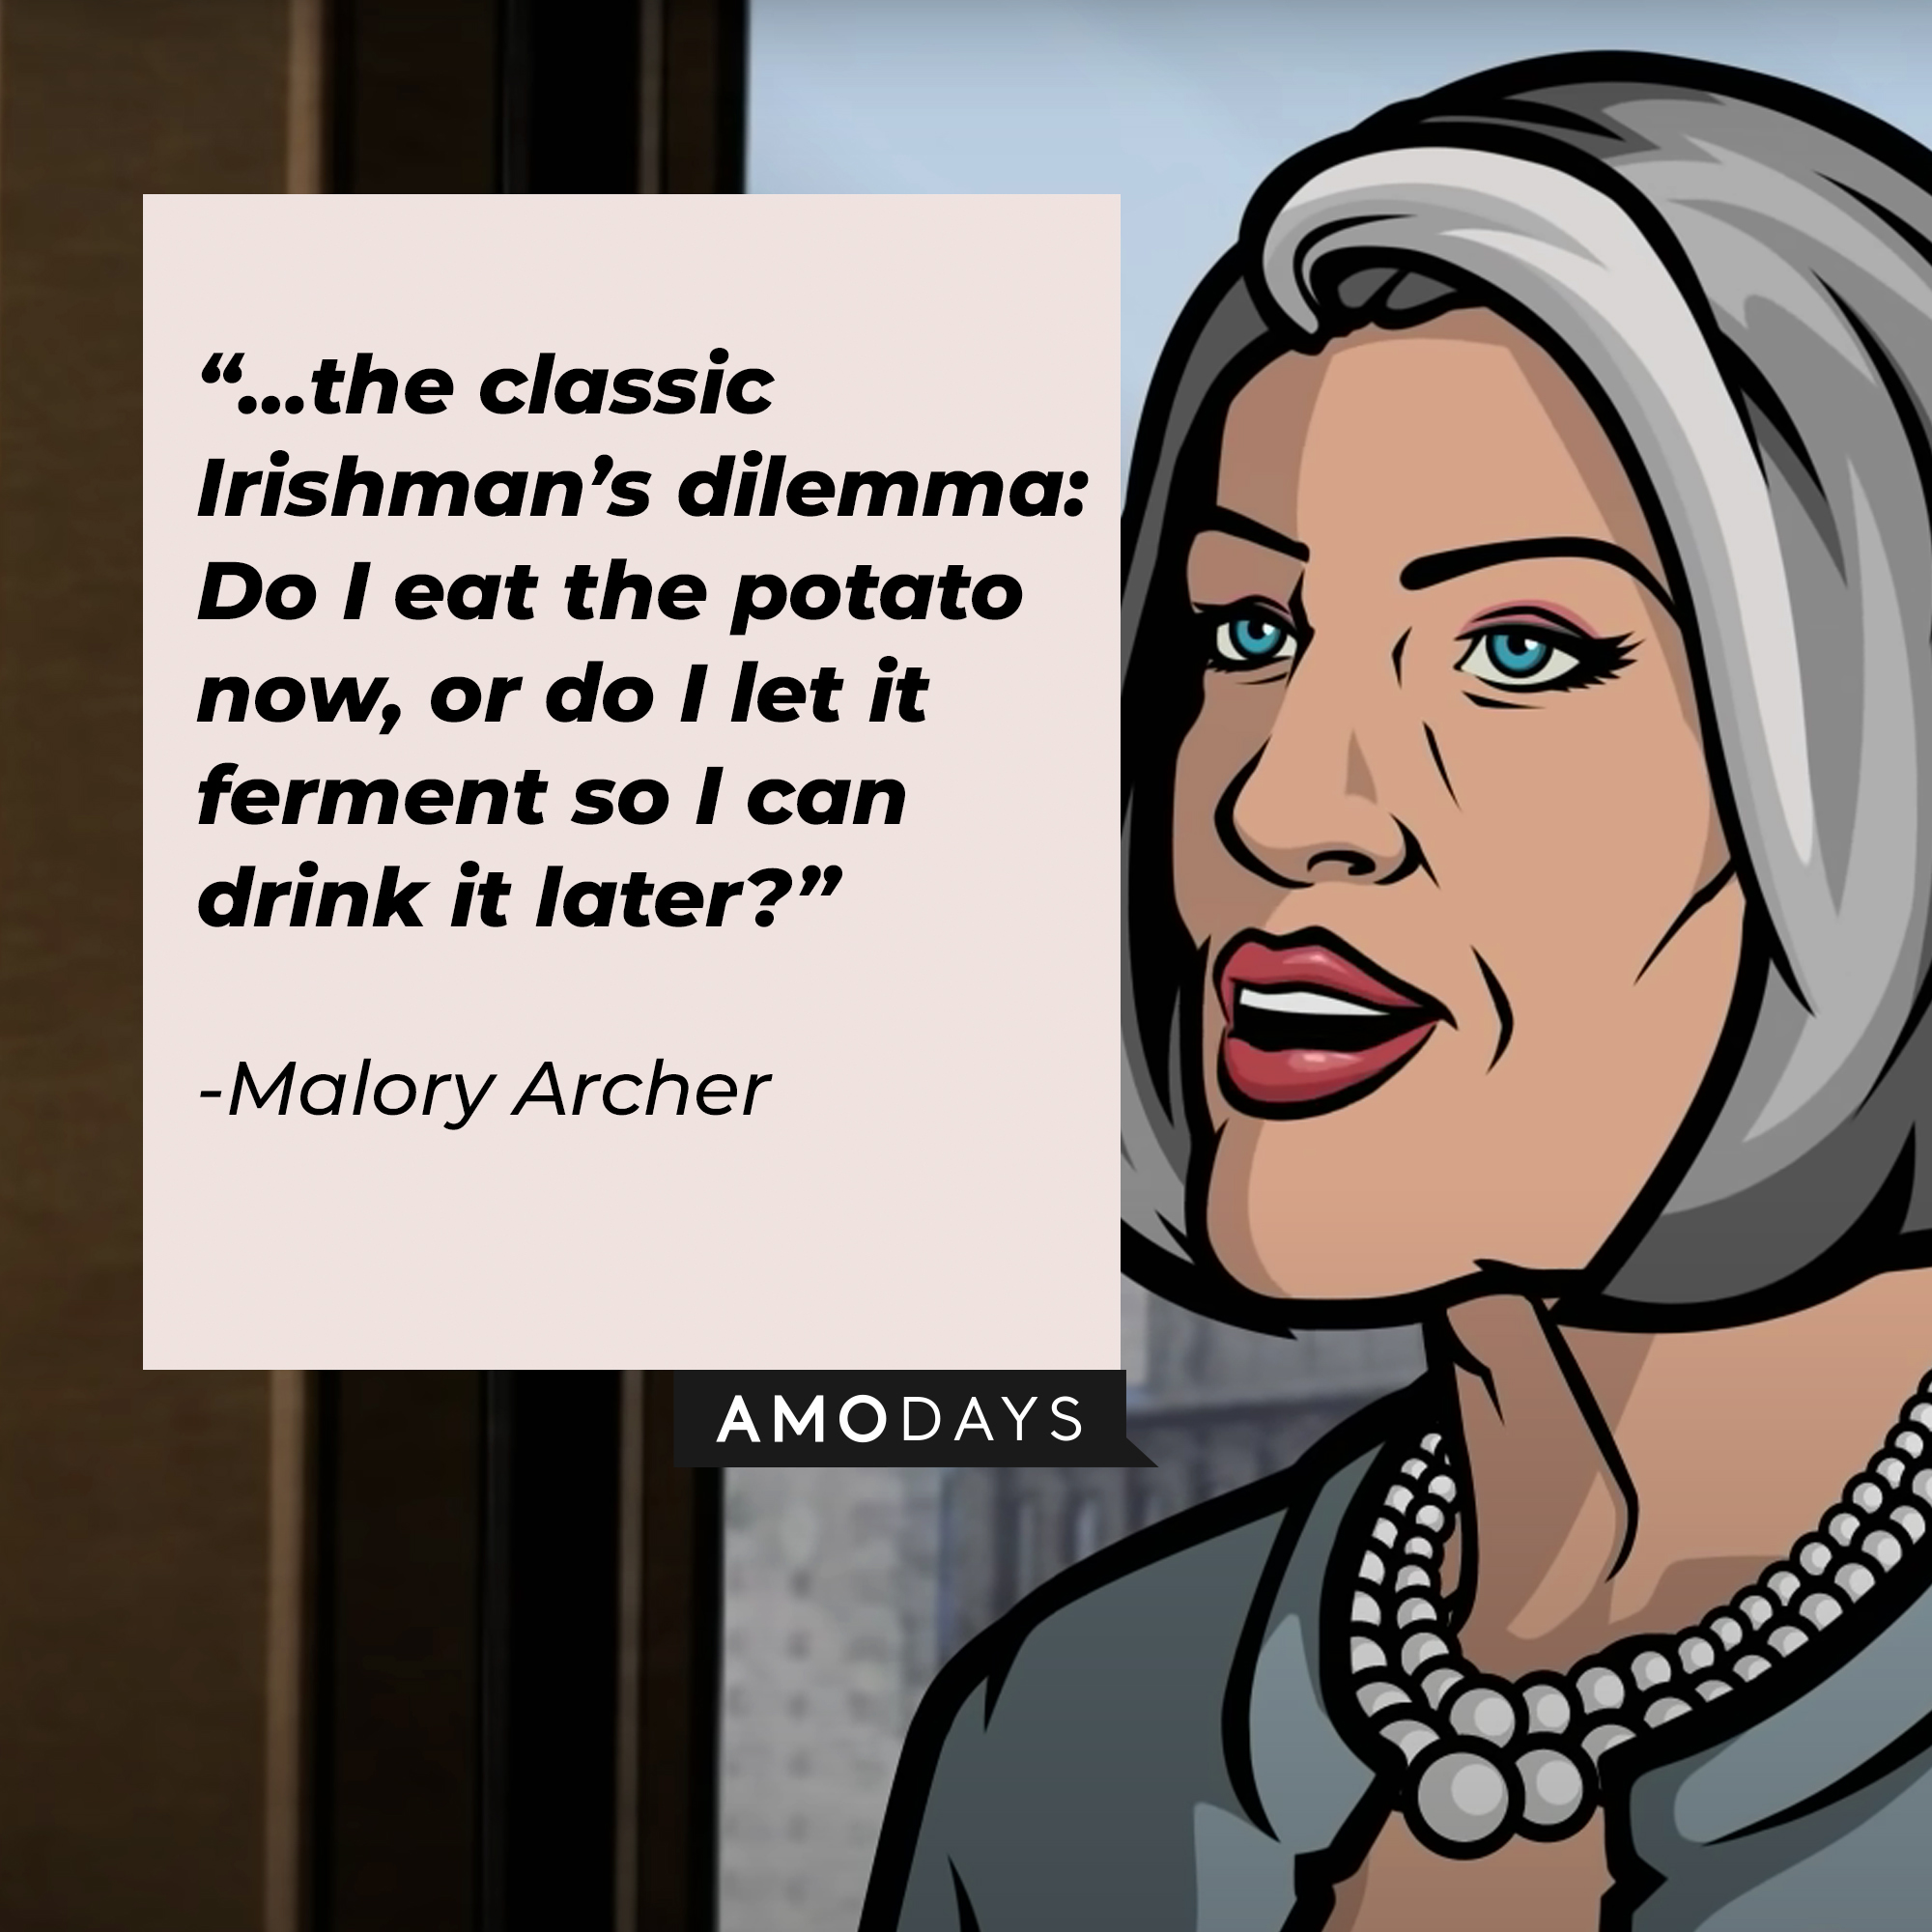 An Image of Malory Archer with her quote: “...the classic Irishman’s dilemma: Do I eat the potato now, or do I let it ferment so I can drink it later?” | Source: Youtube.com/Netflixnordic